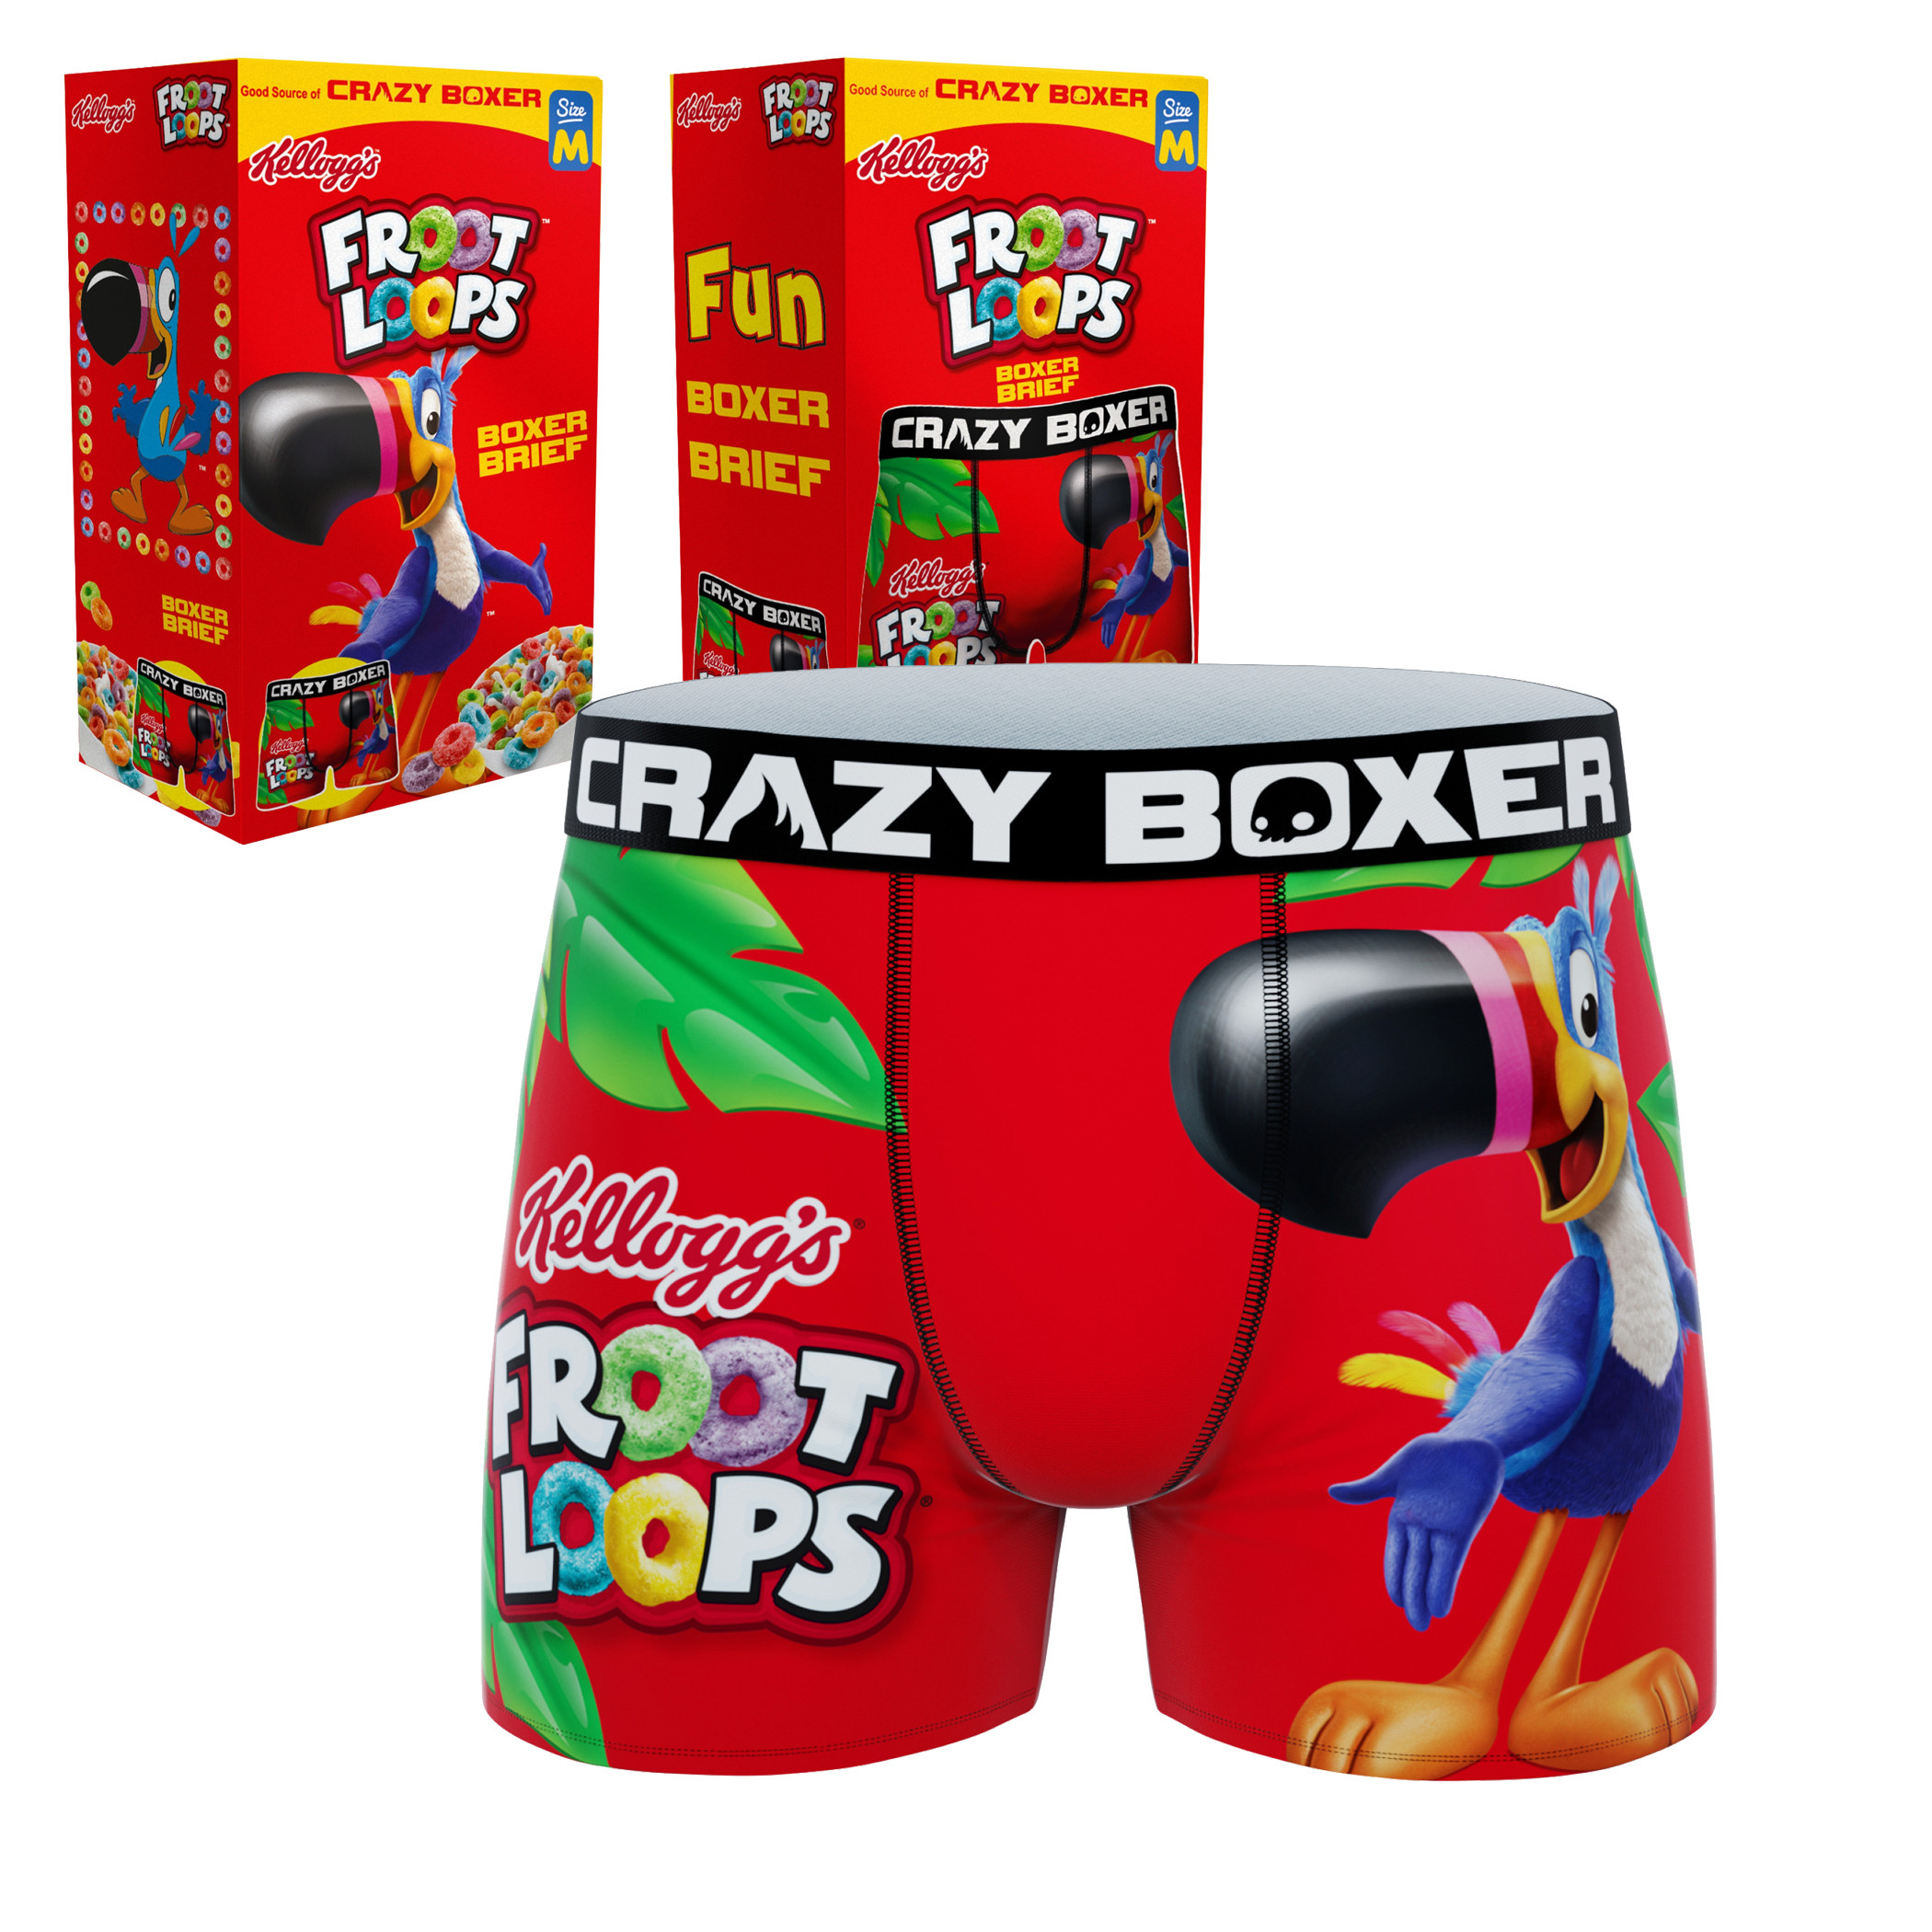 Crazy Boxers Kellogg's Cereal Boxers Variety Boxer Briefs BLACK LARGE